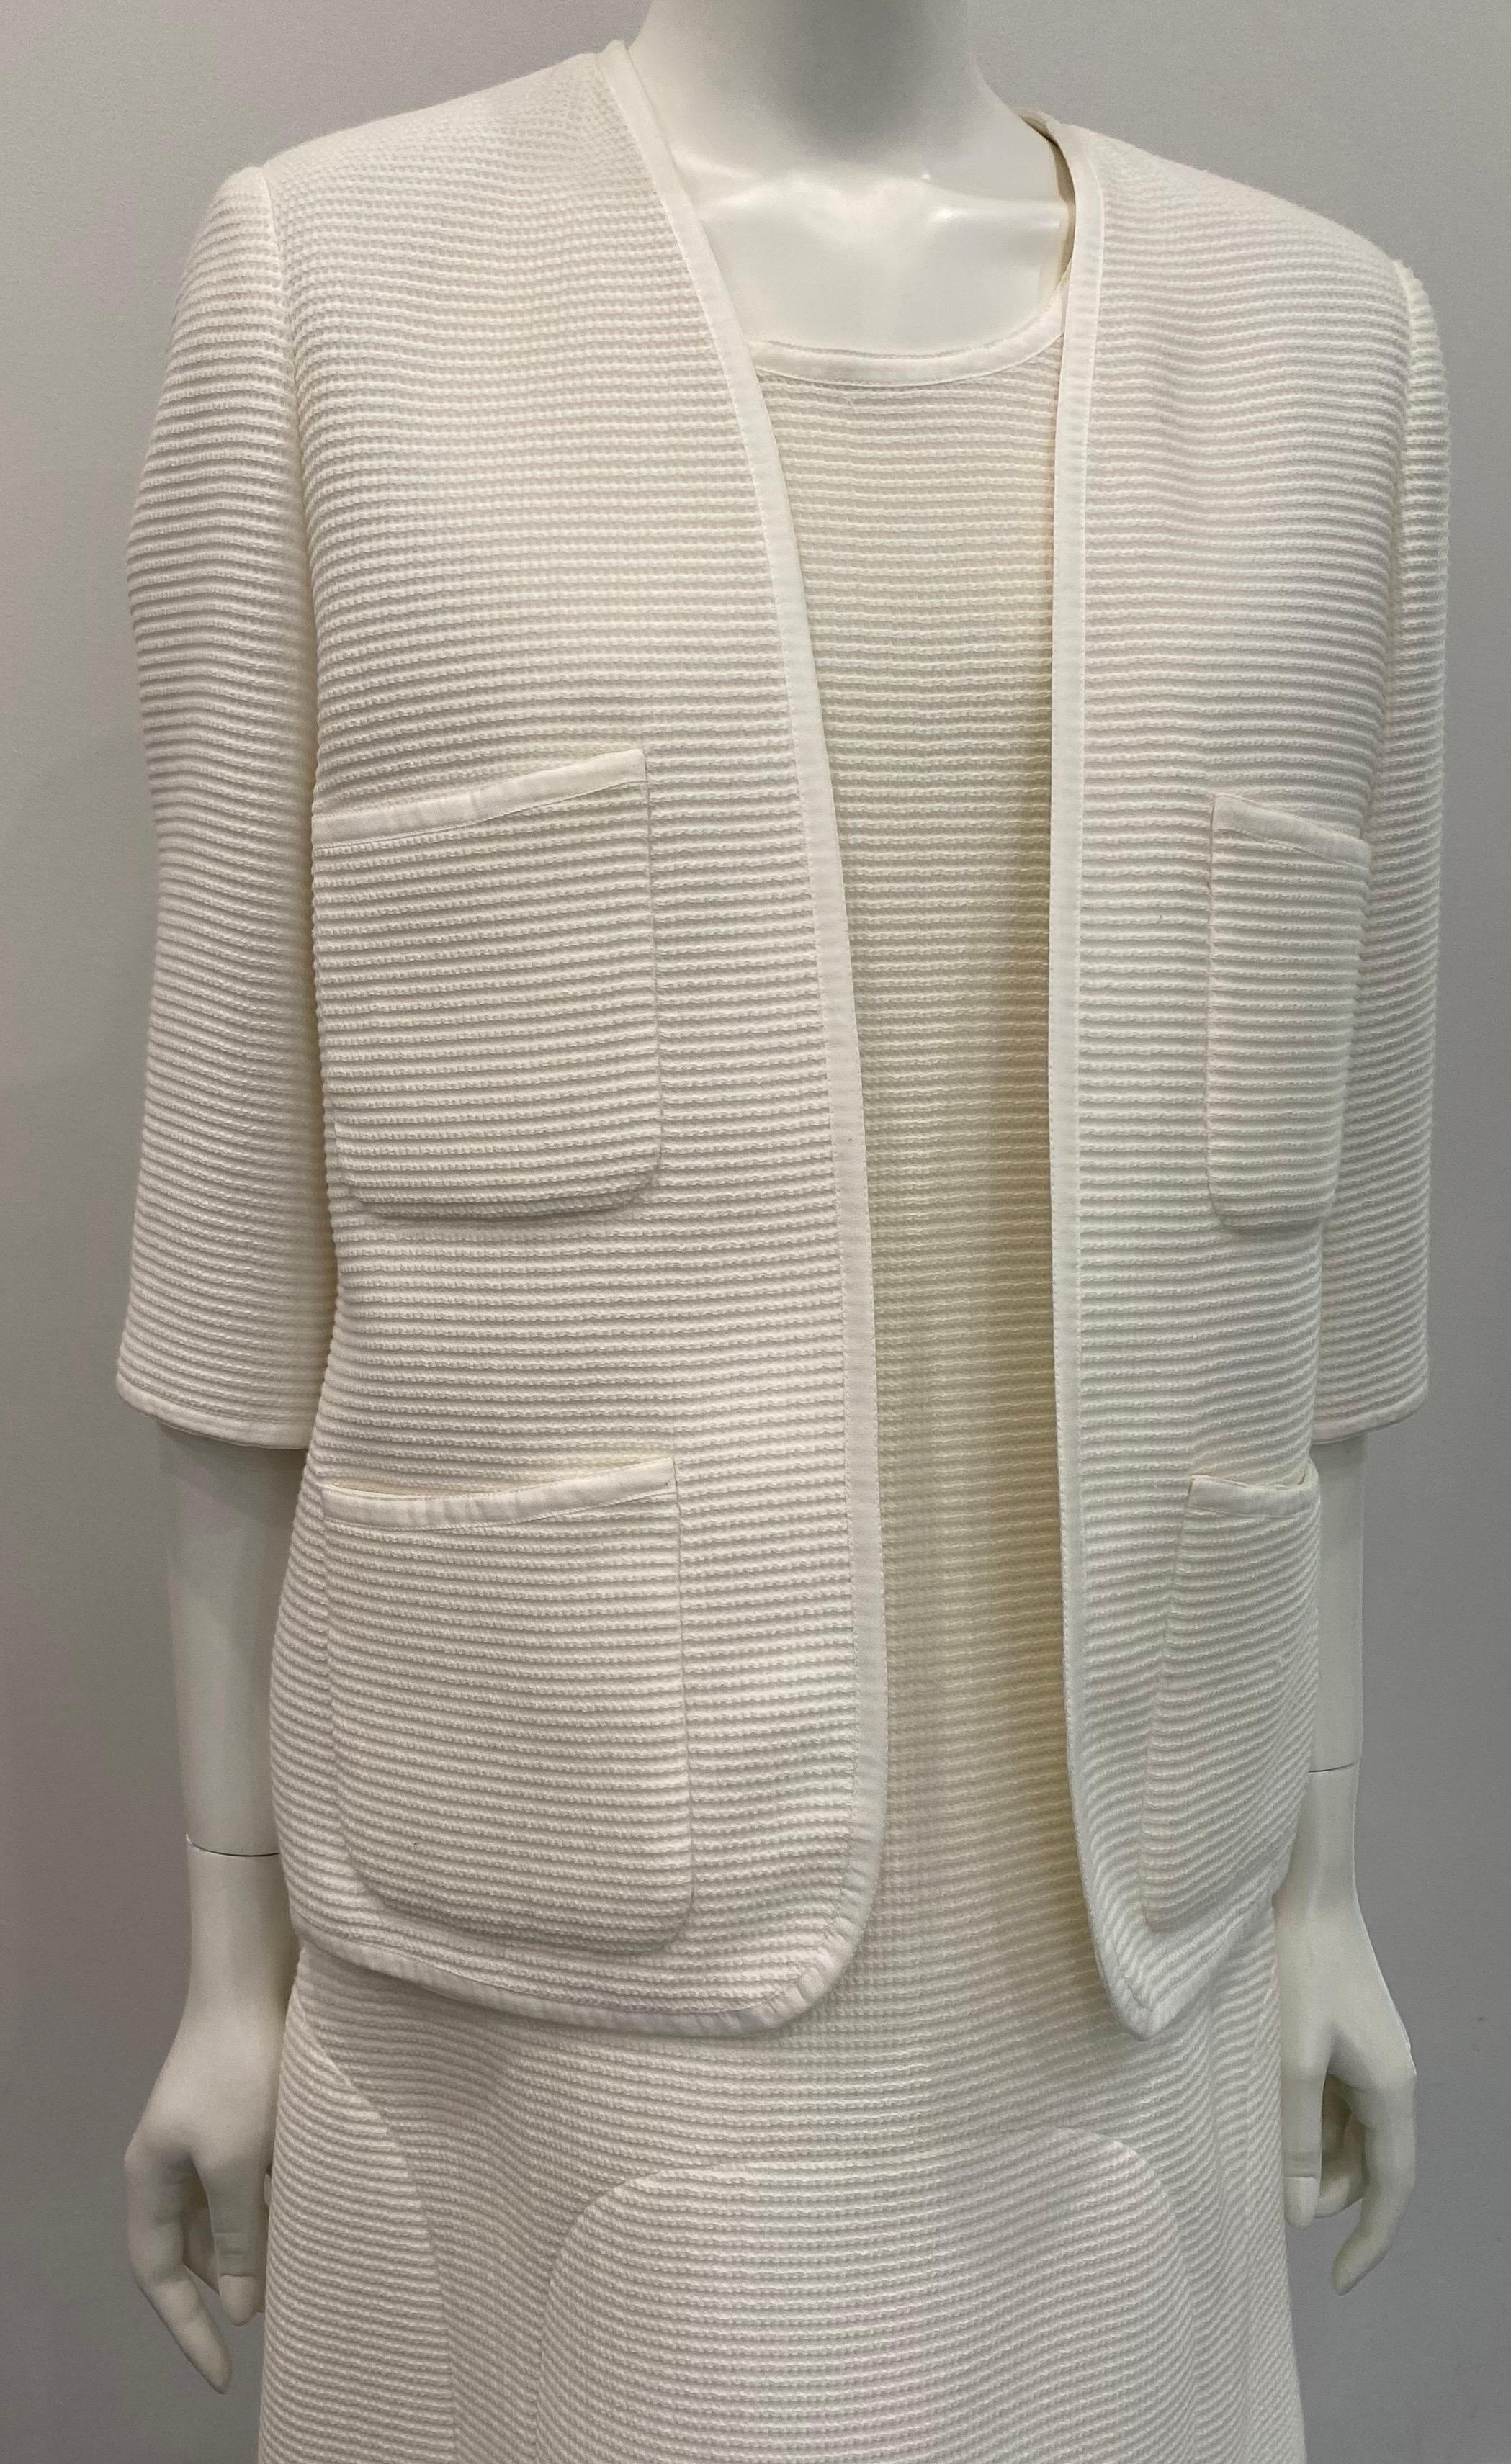 Chanel Ivory Ribbed Cotton Sleeveless Shift Dress with Jacket - Sz 42 In Good Condition For Sale In West Palm Beach, FL